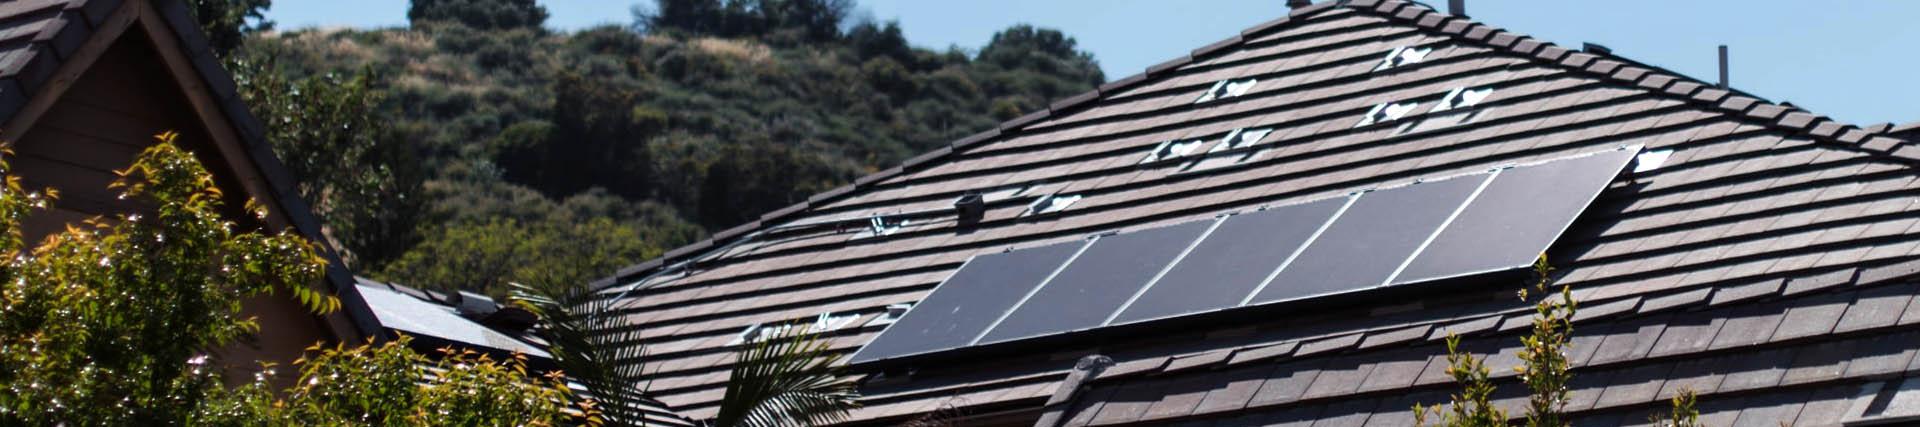 Five solar panels attached to a rooftop pictured on a sunny day